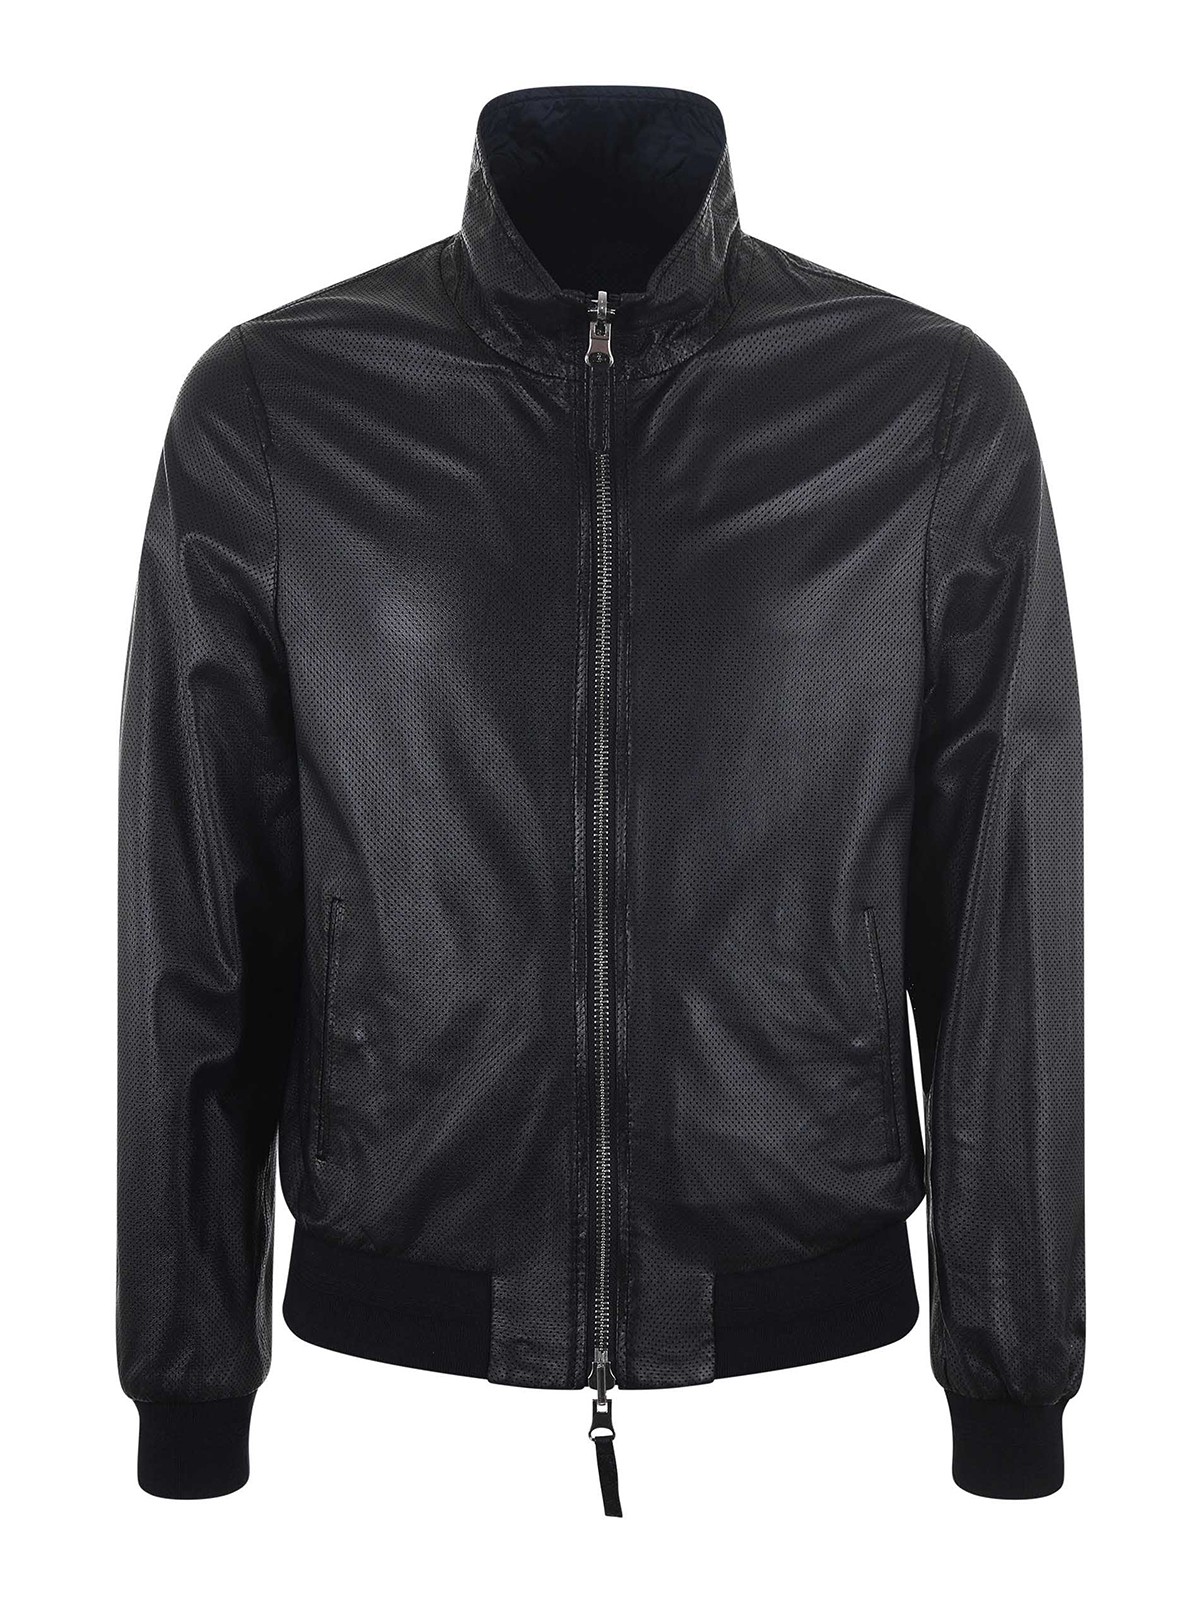 The Jack Leathers Reversible Jacket In Black